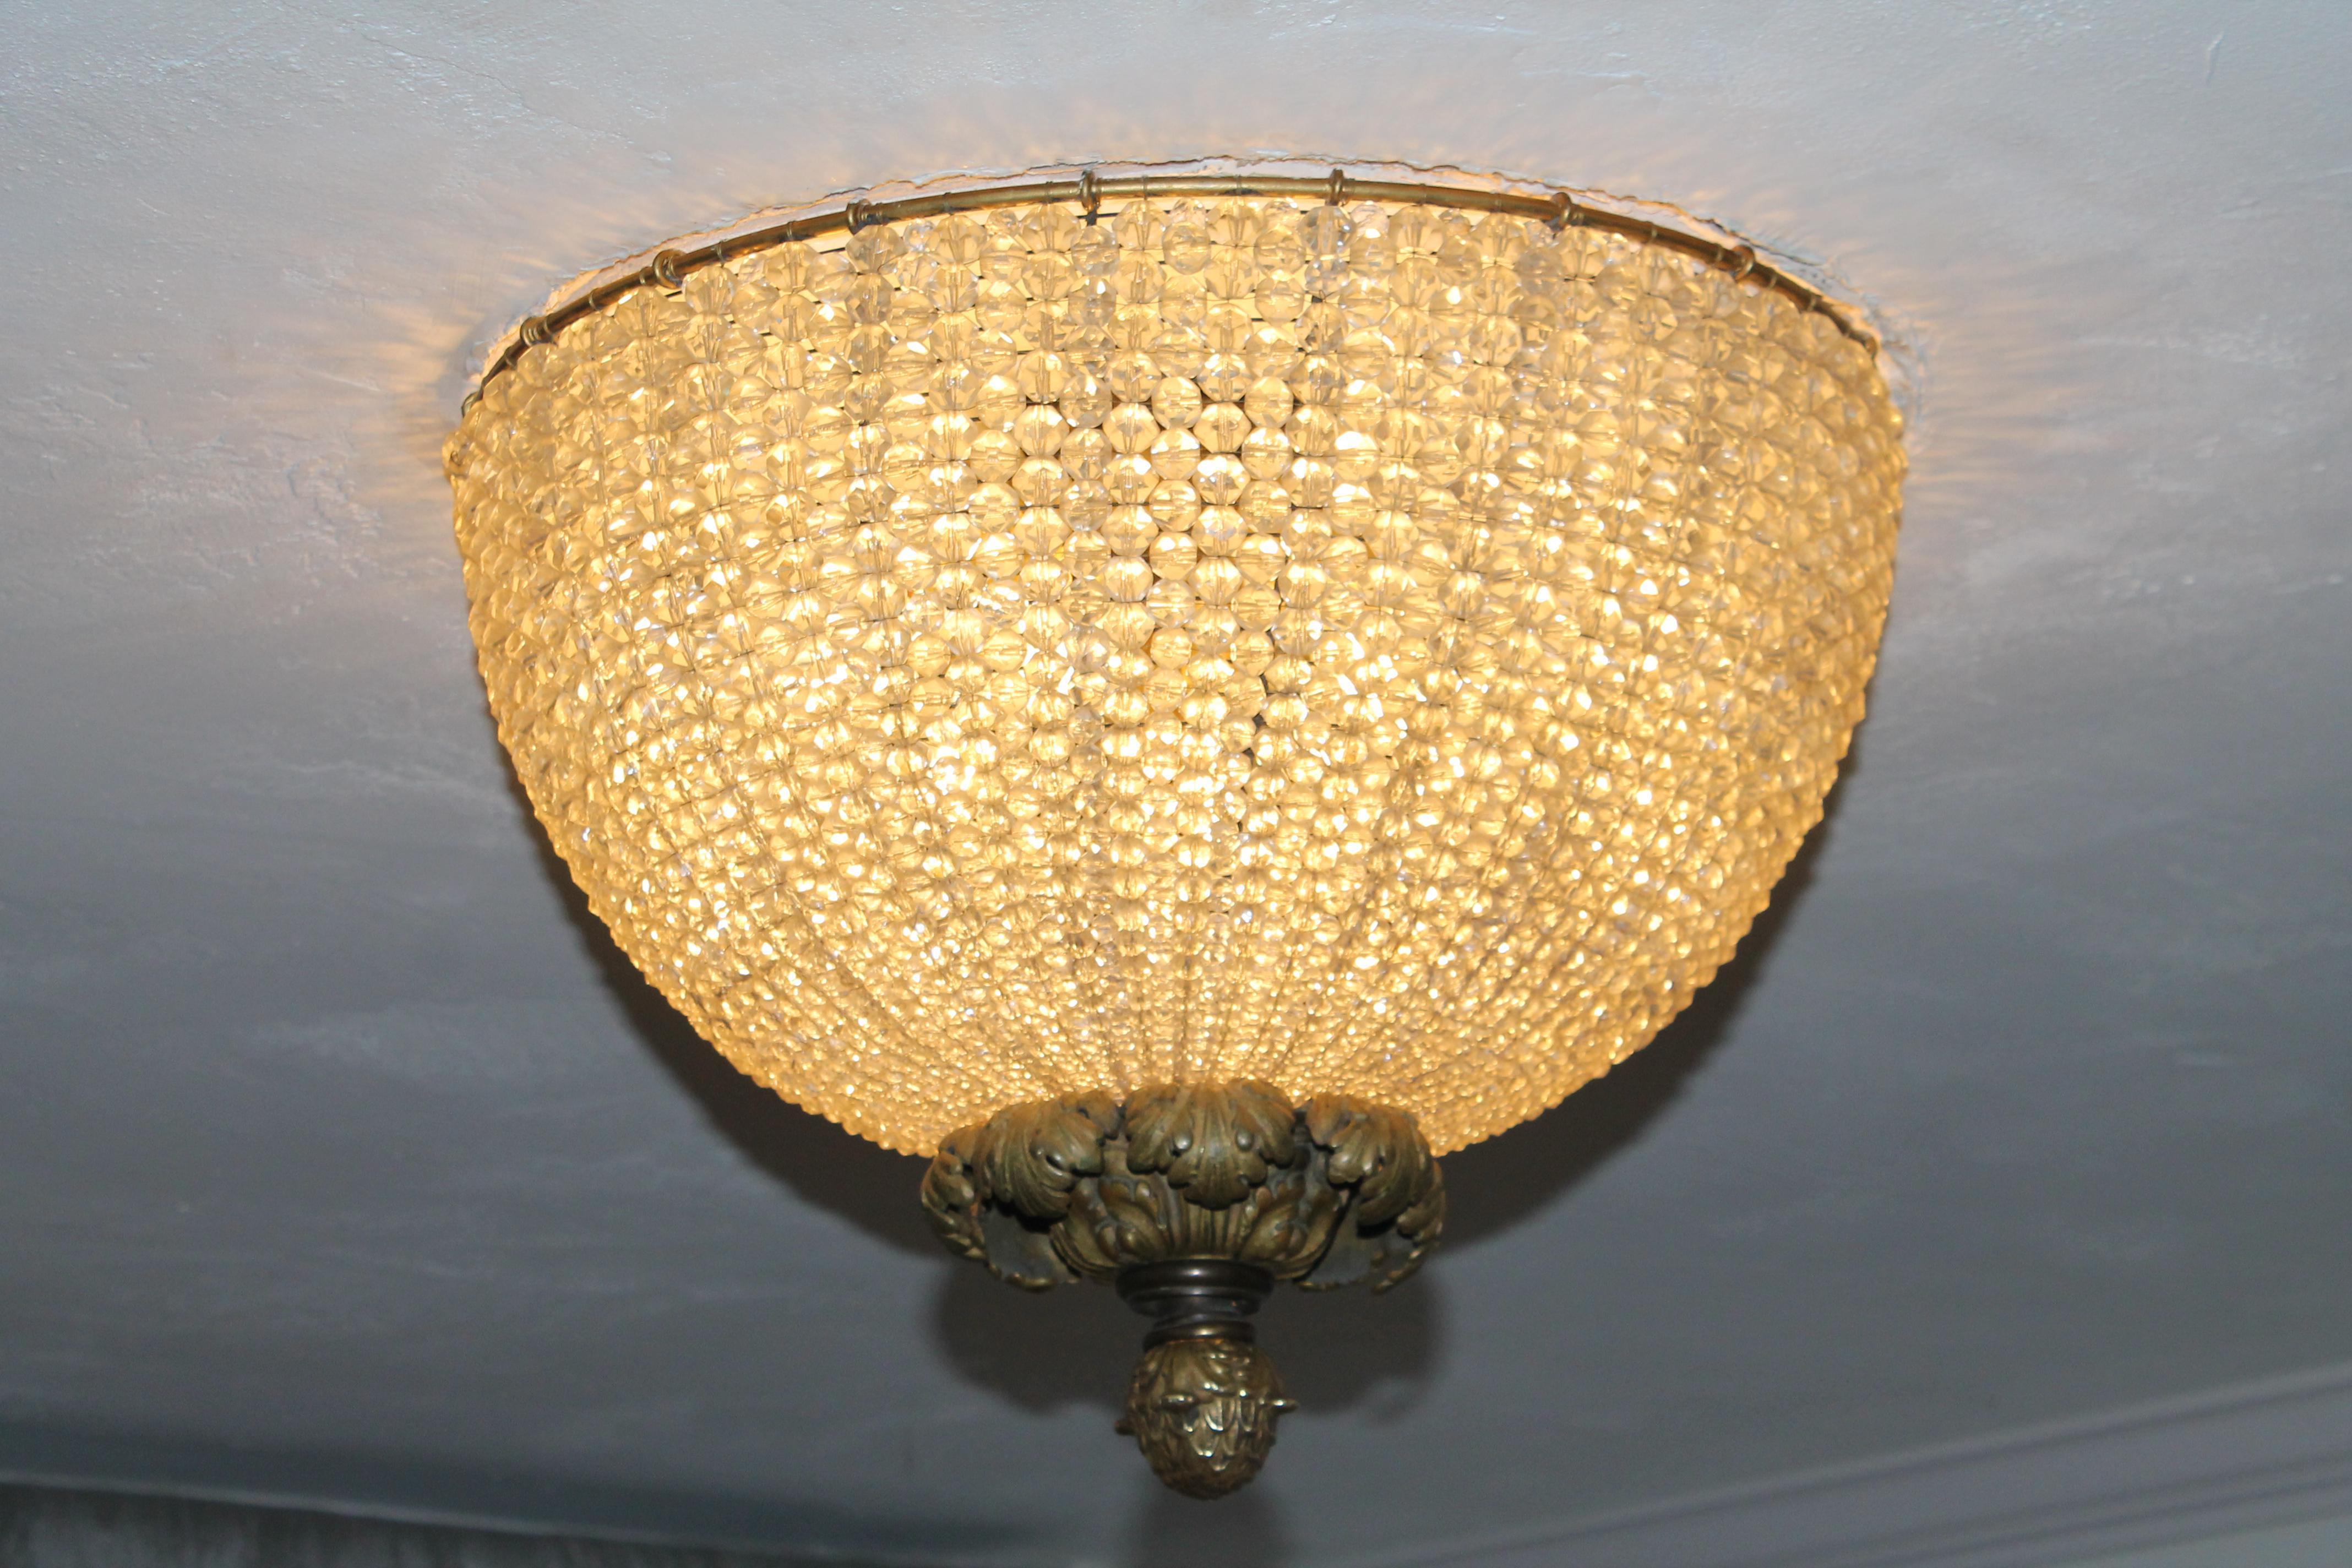 Late 19th Century 19thc XL French Napoleon III Cut Crystal Beaded Dome Flush Mount Ceiling Fixture For Sale